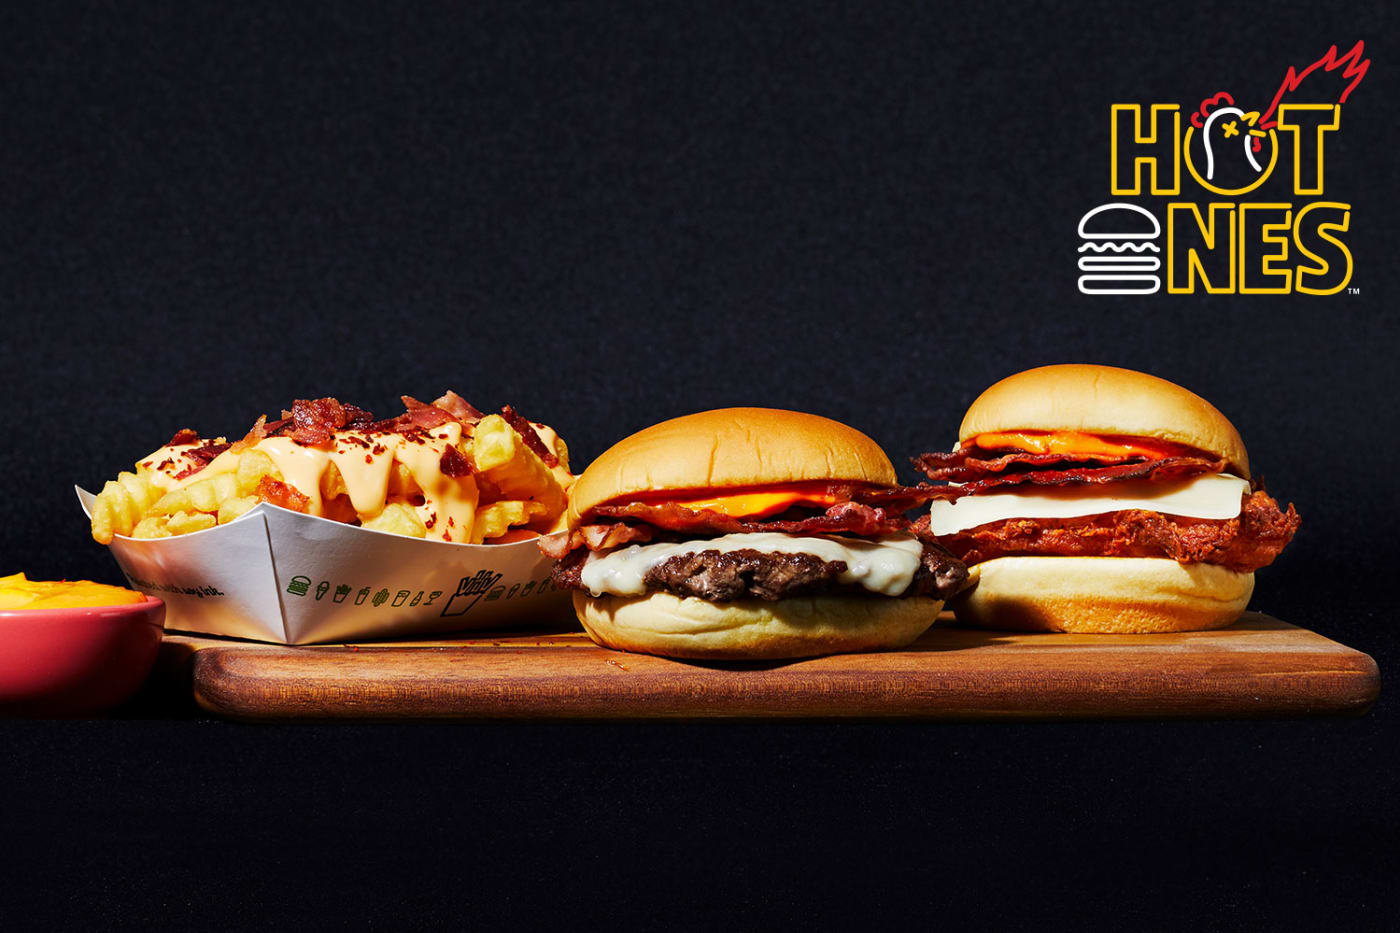 hot ones x shake shack limited edition menu featuring a burger, chicken sandwich, and cheese fries